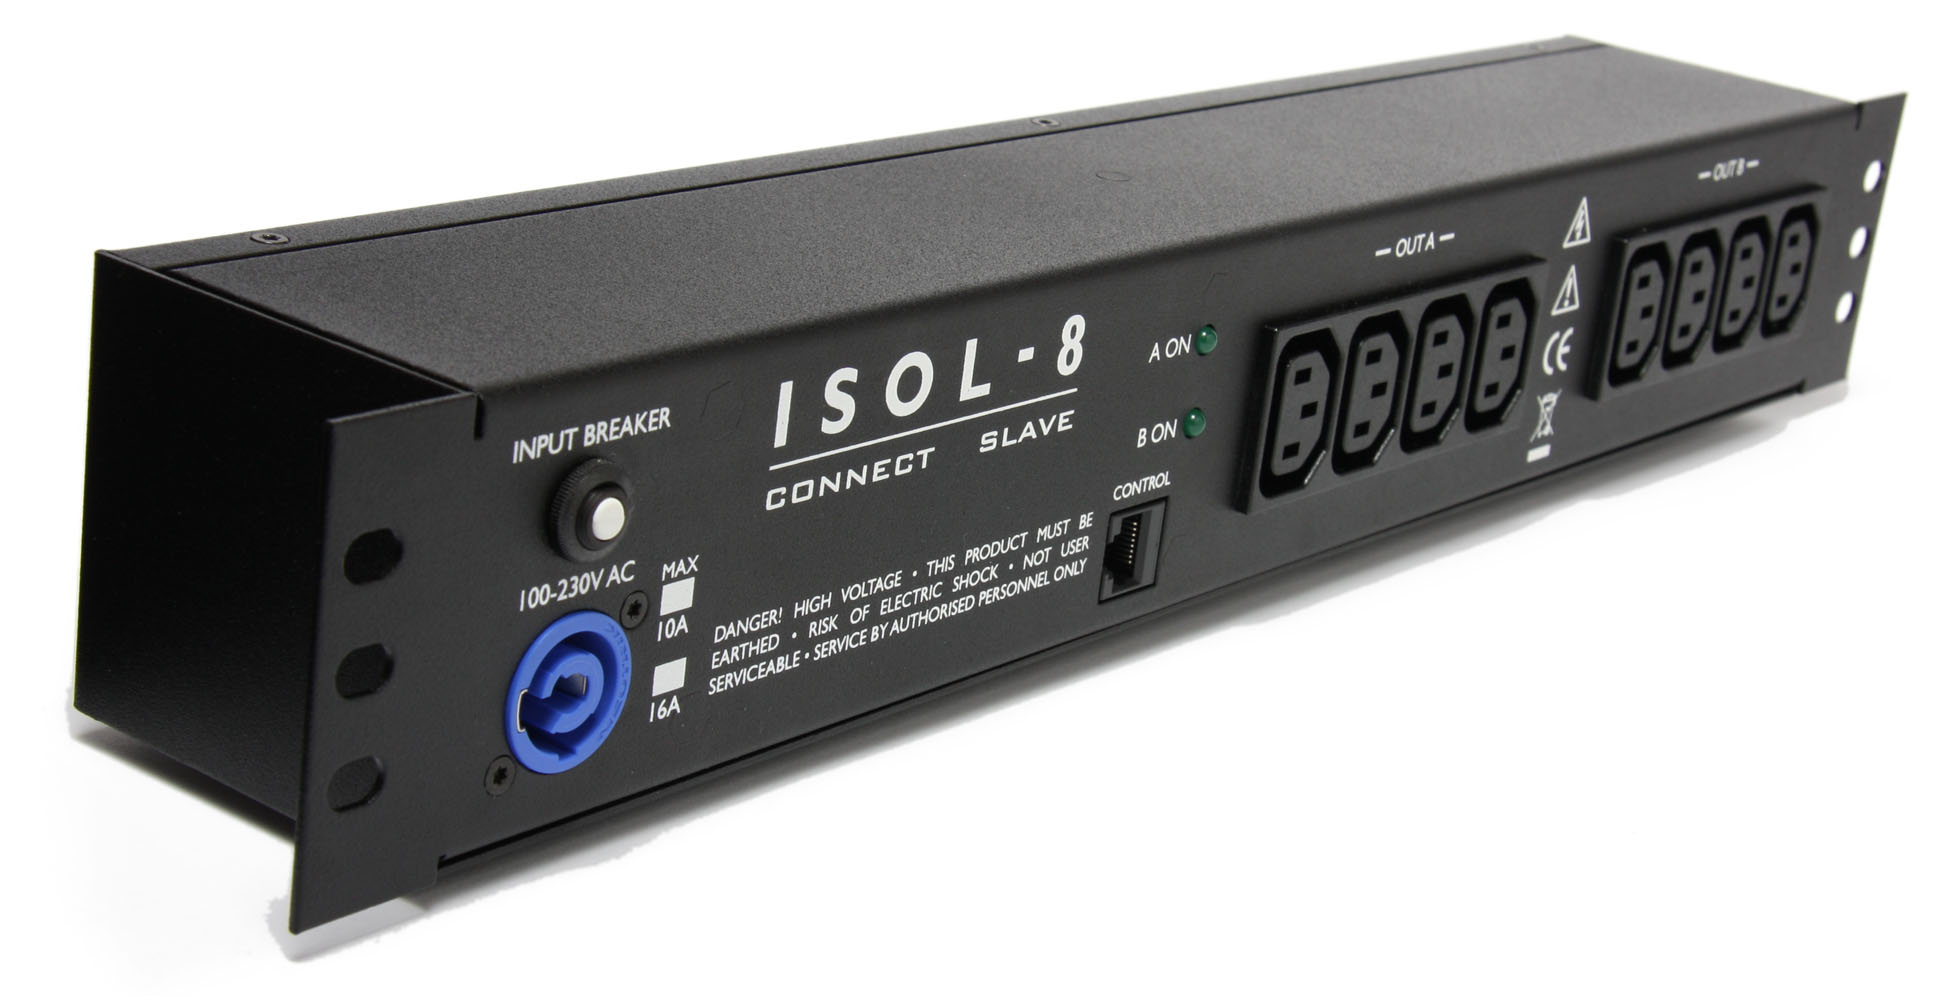 ISOL-8 Connect Slave IEC